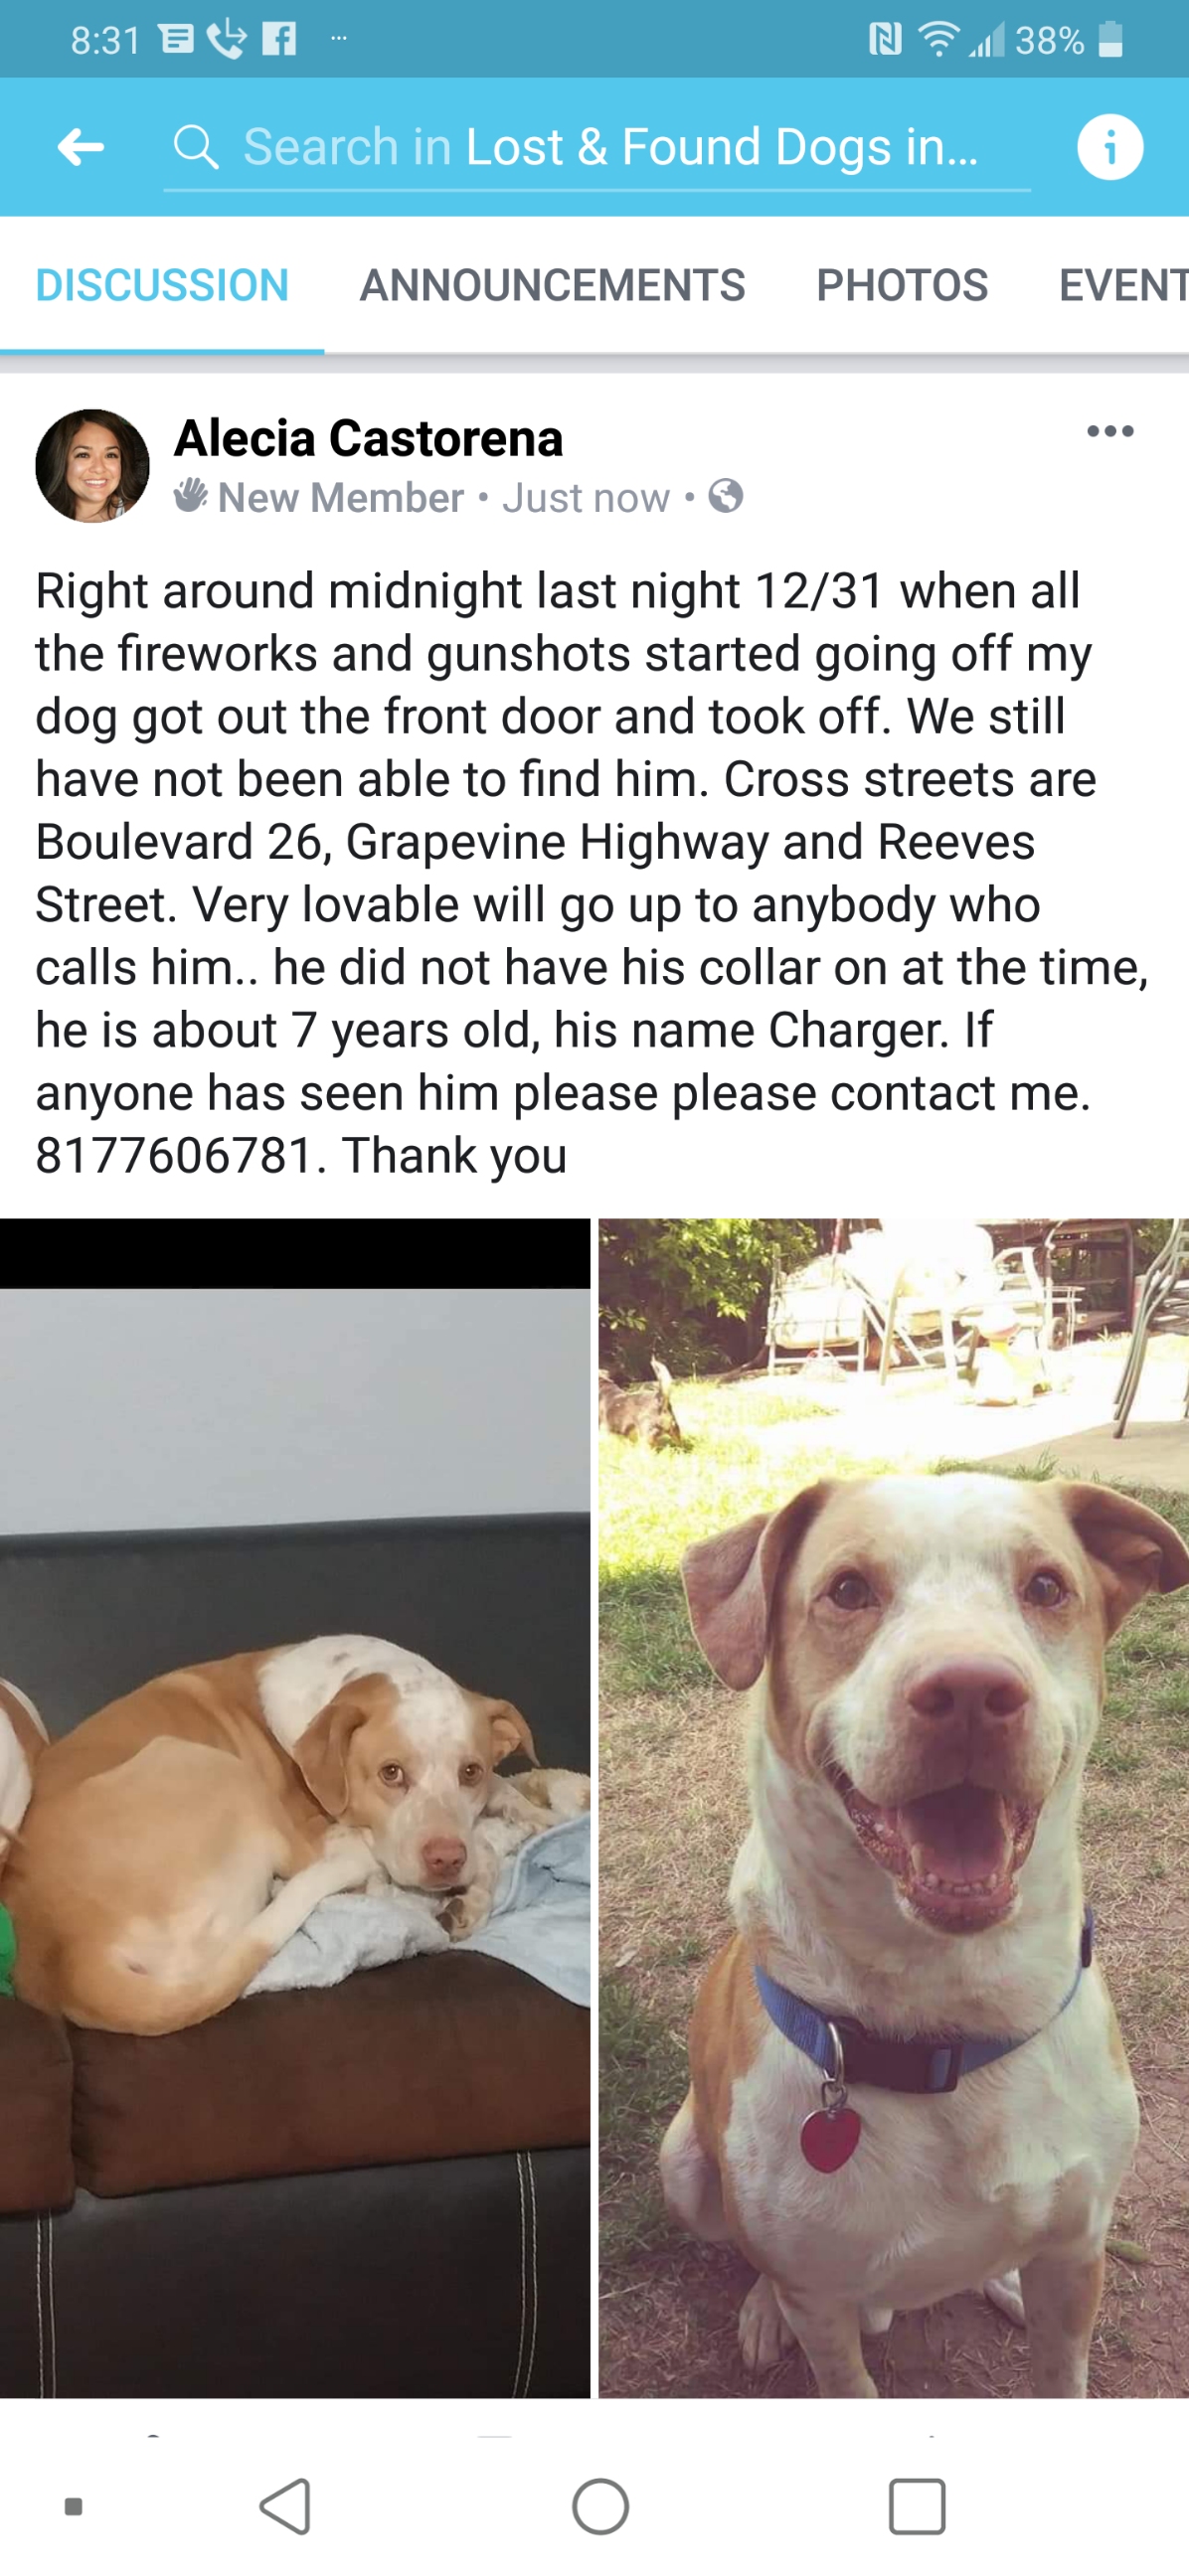 Image of Charger, Lost Dog